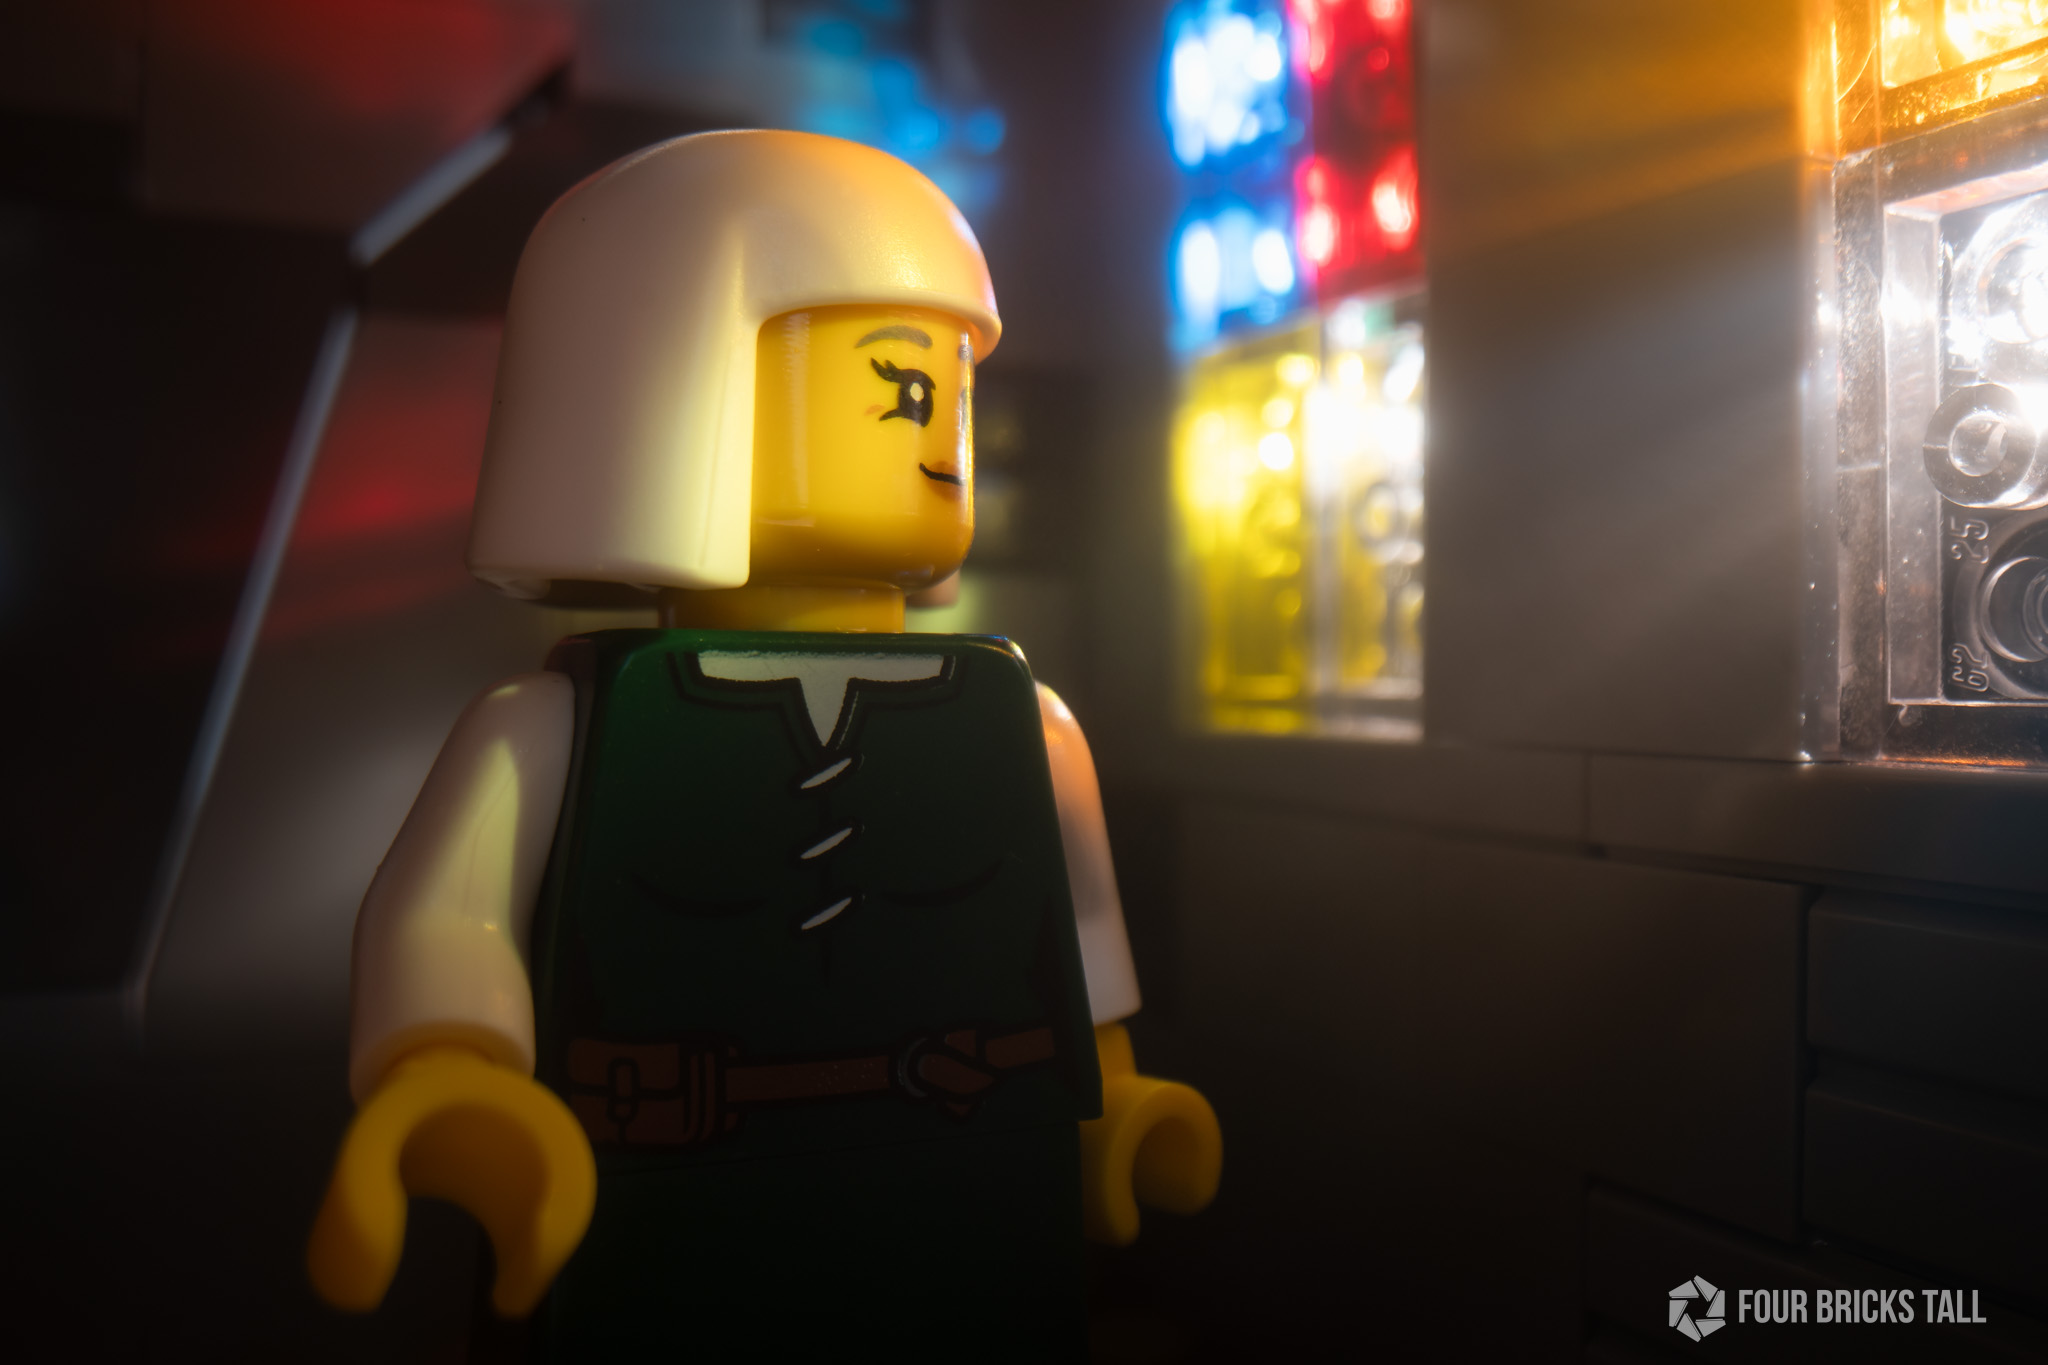 Medieval minifigure looking into stained glass window light